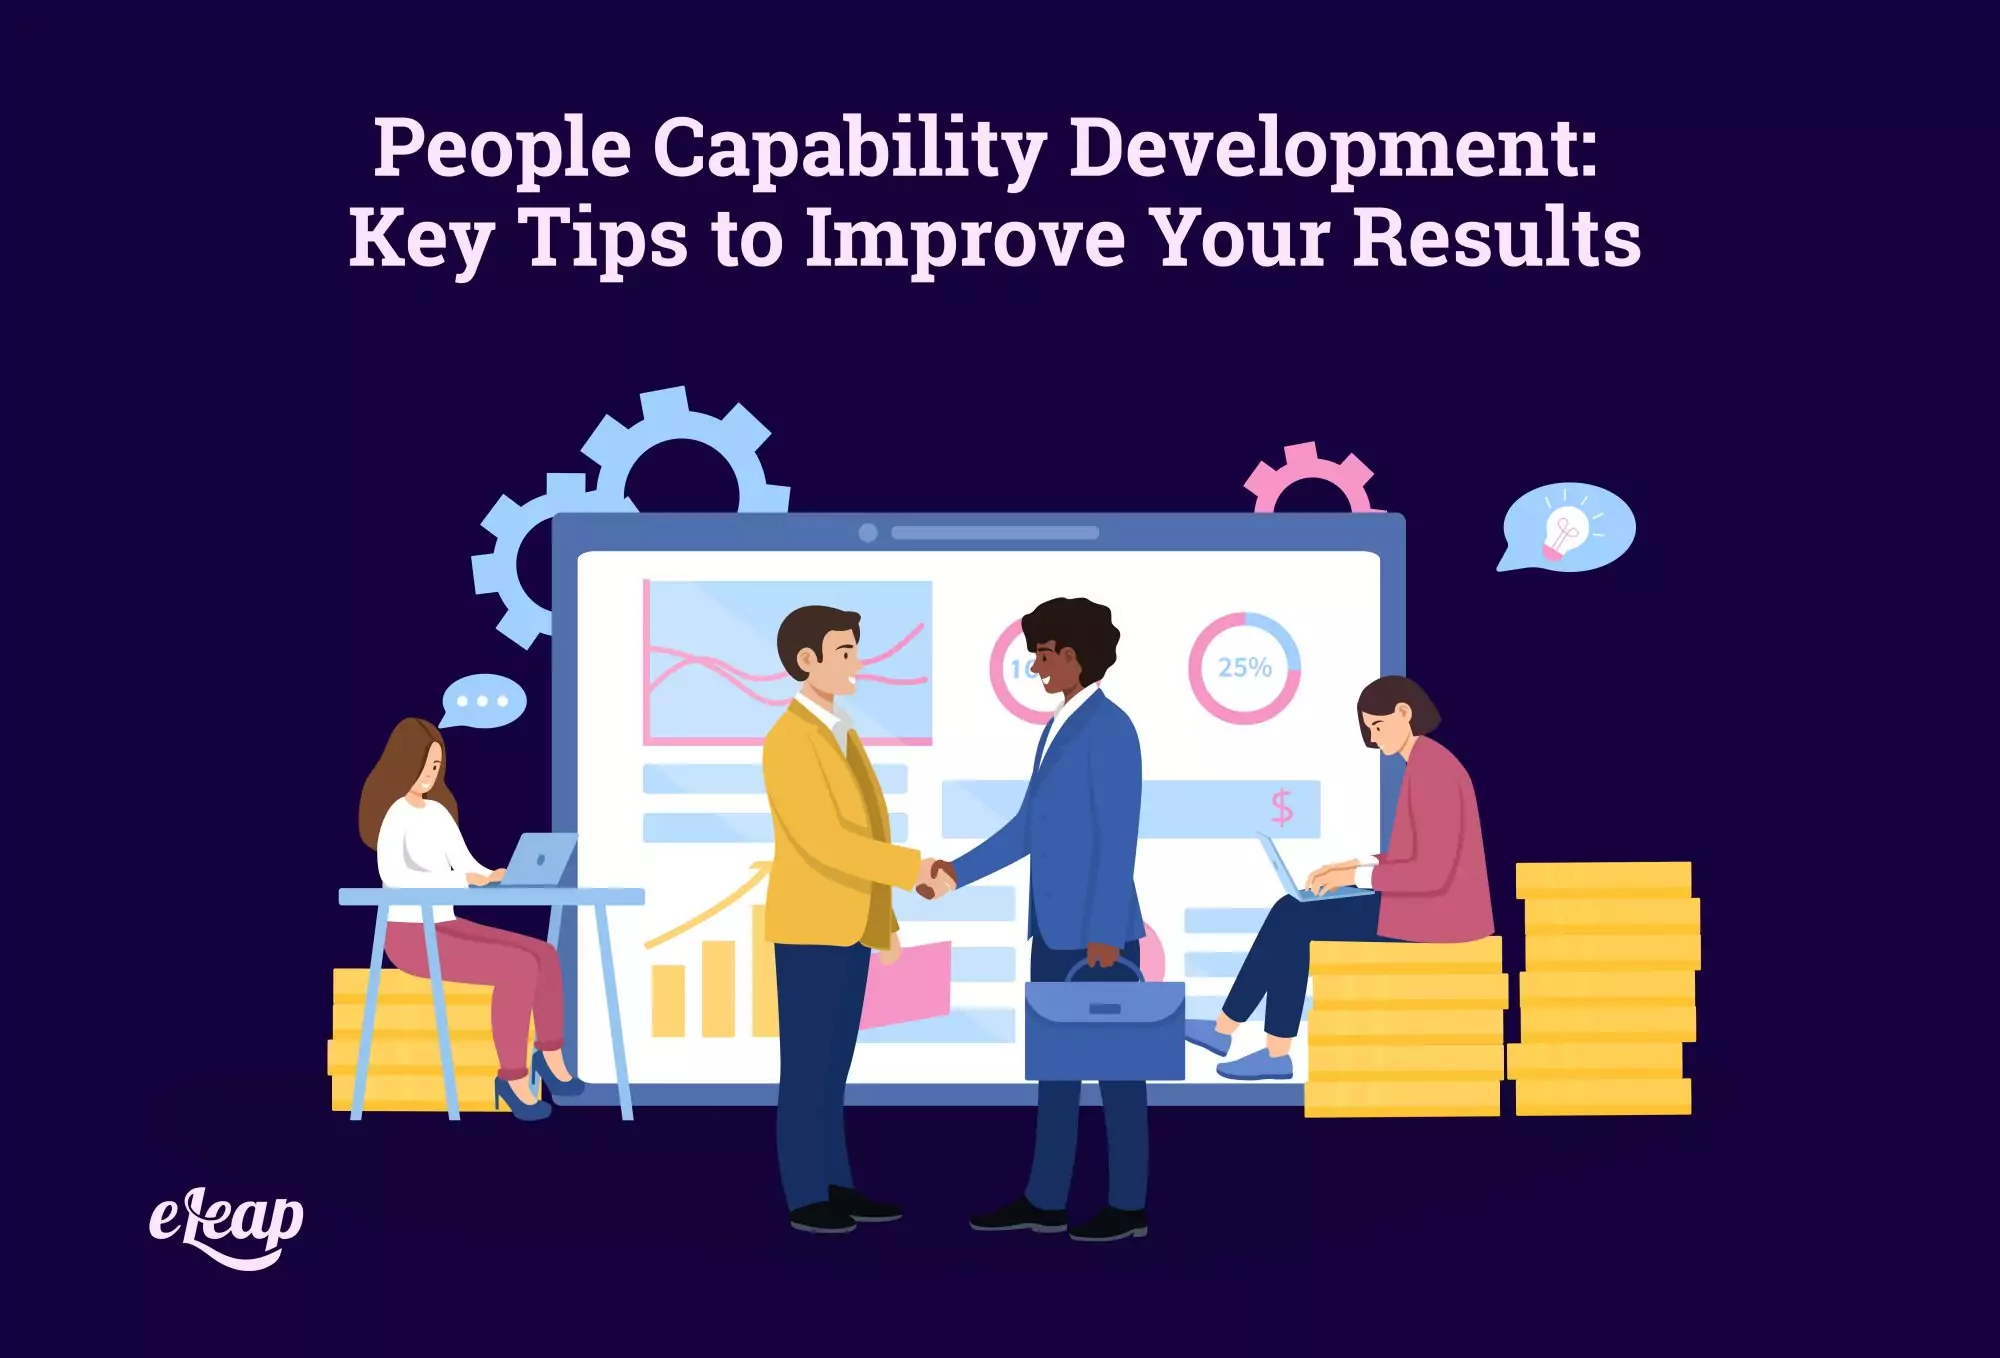 People Capability Development: Key Tips to Improve Your Results